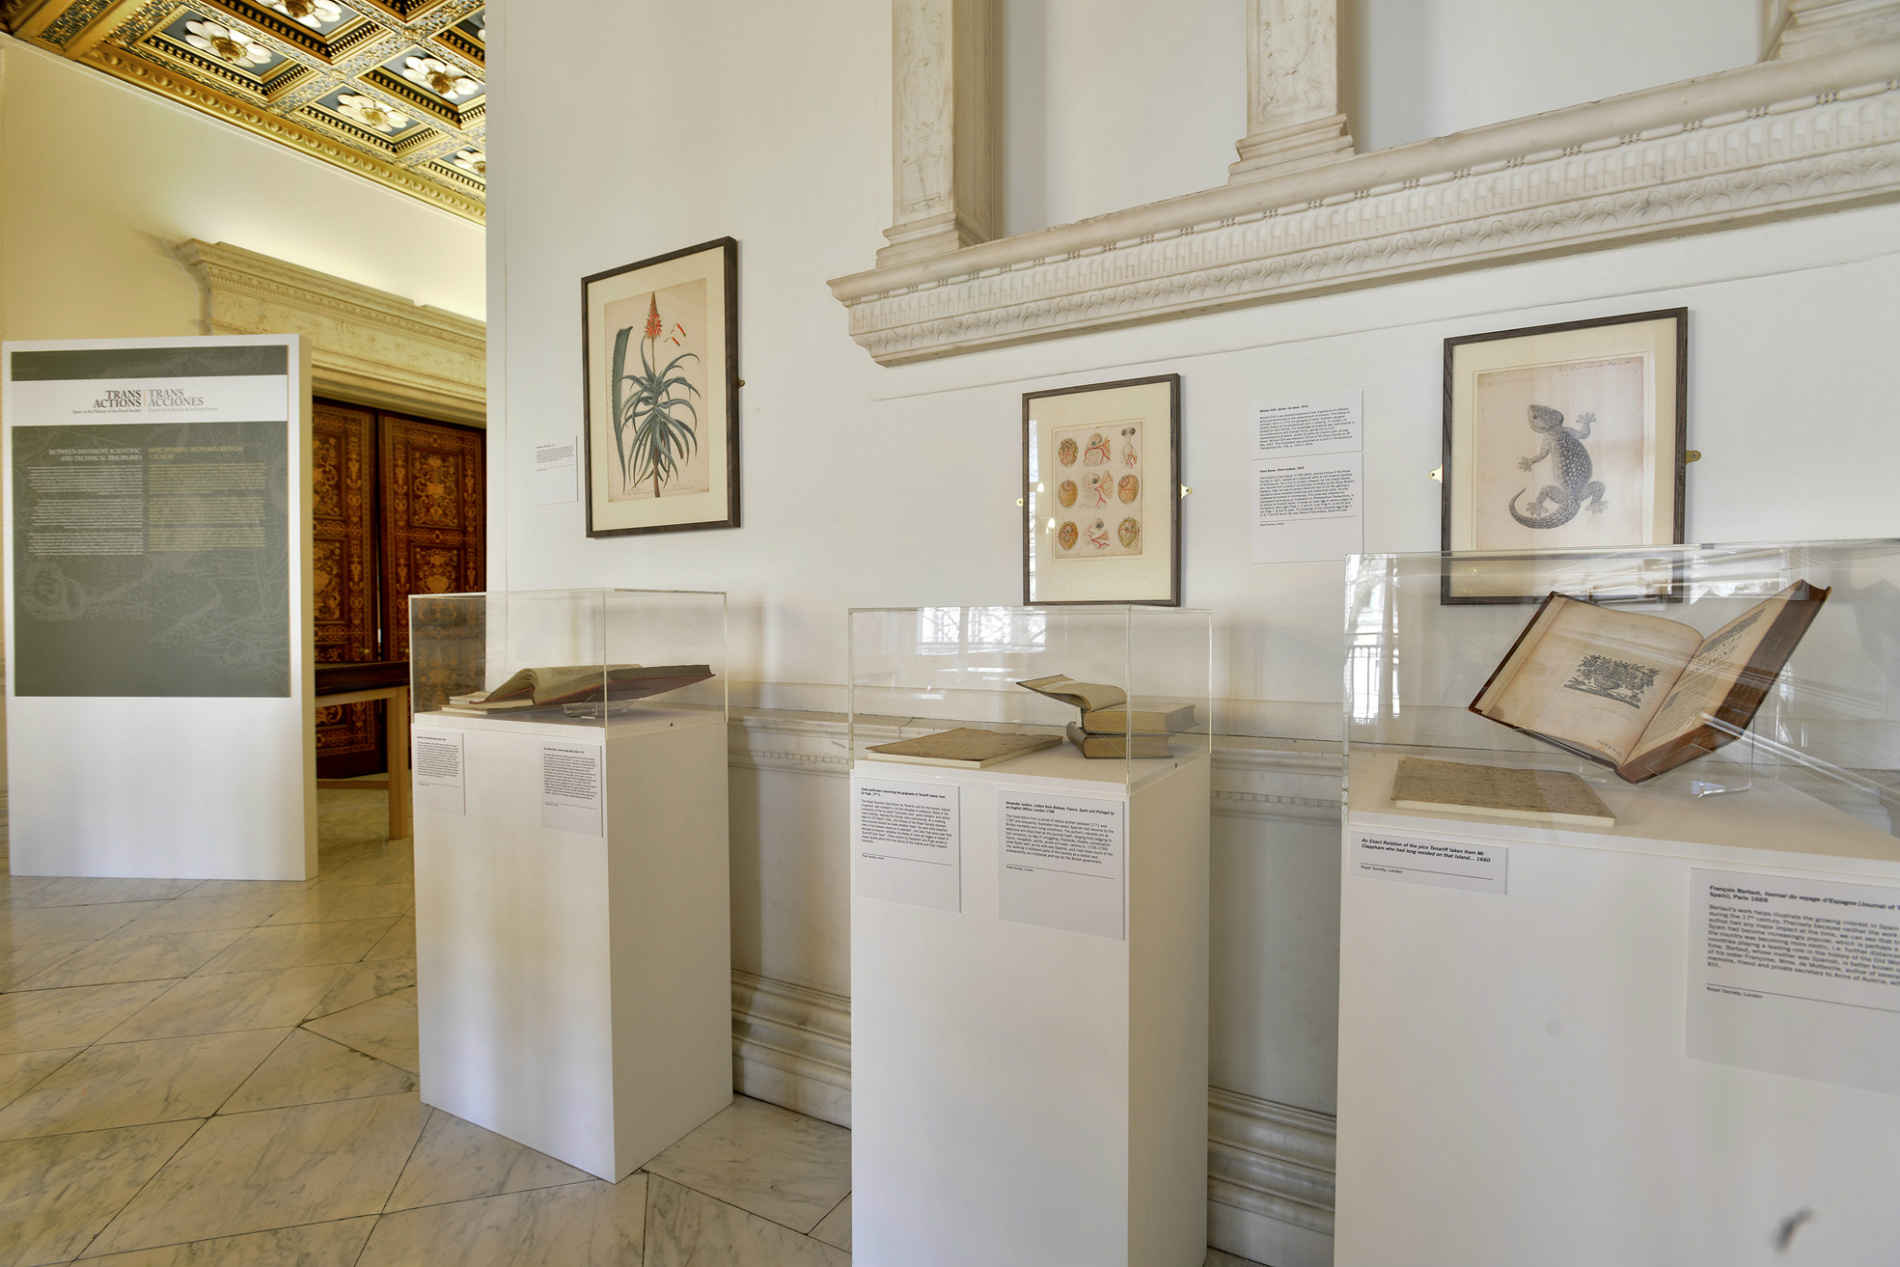 Exhibition “Transactions. Spain in the History of the Royal Society”